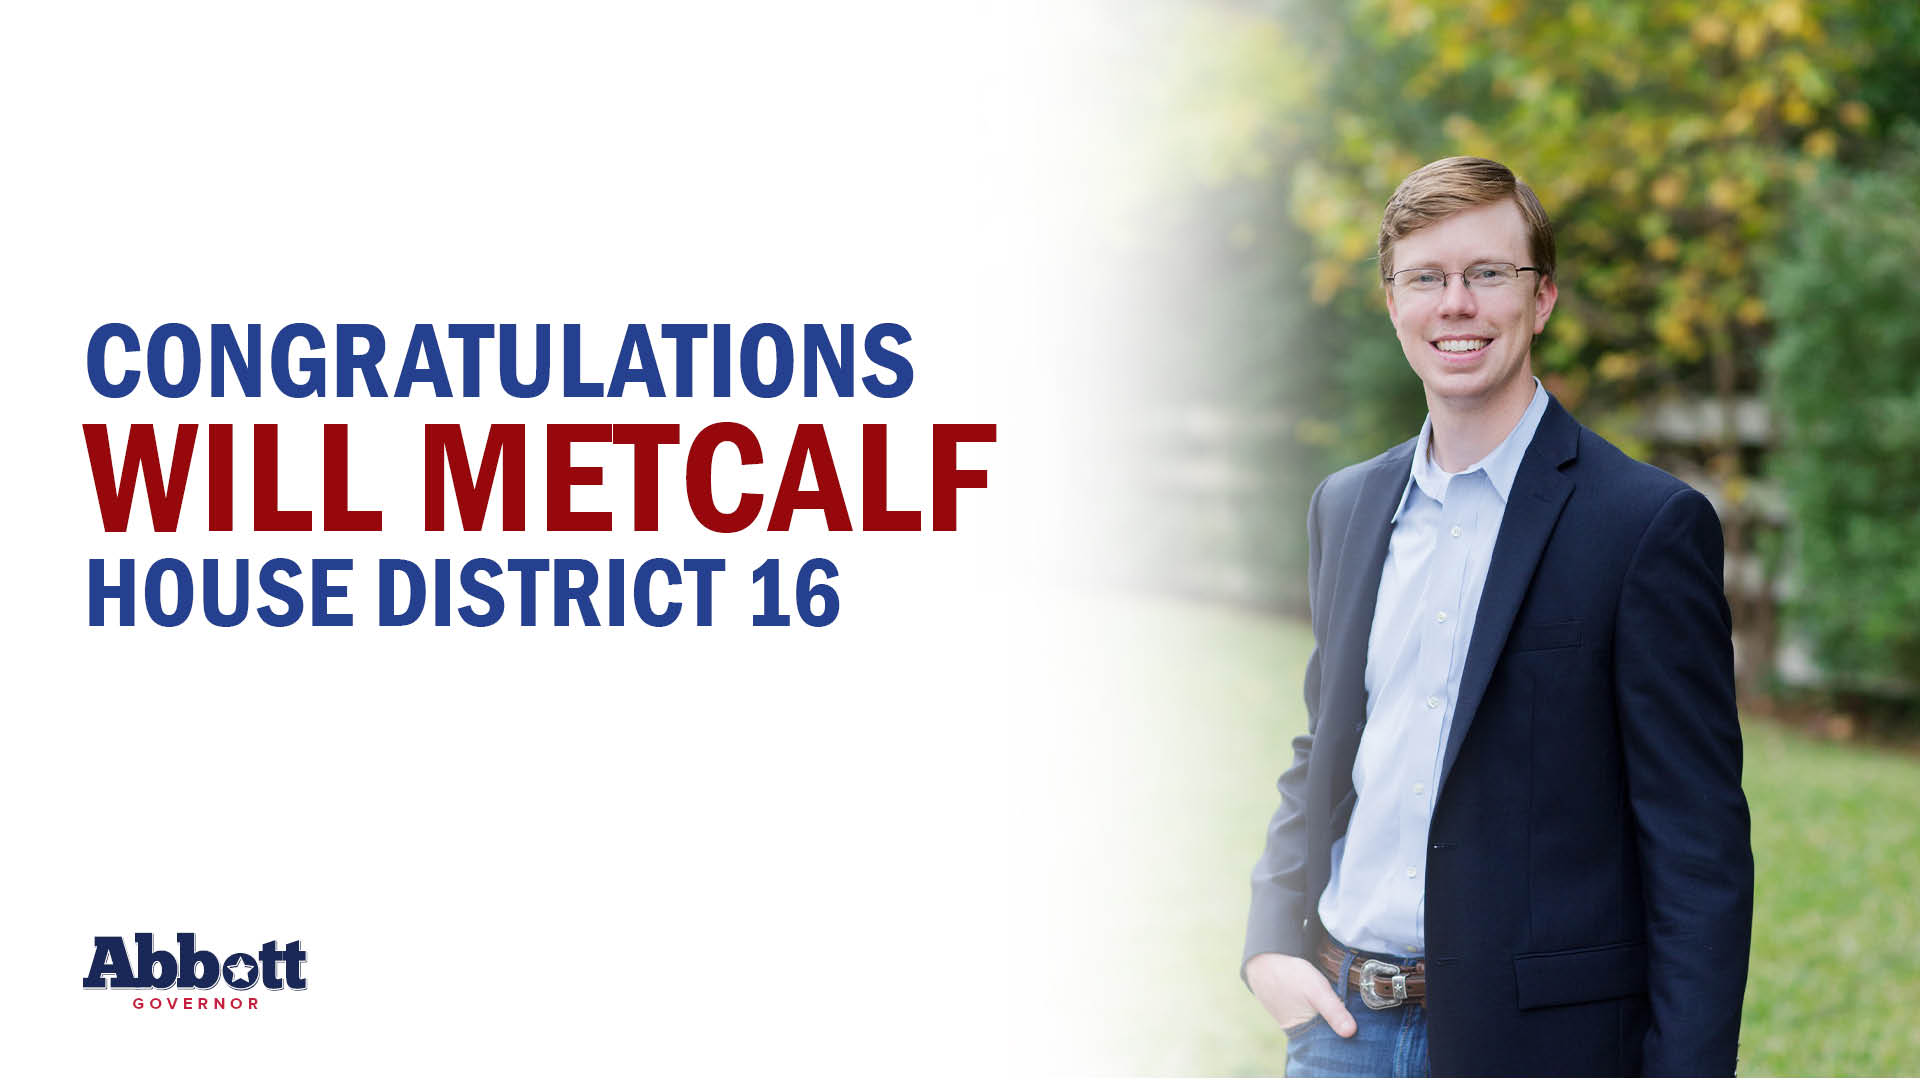 Governor Abbott Congratulates Rep. Will Metcalf On Re-Election Victory